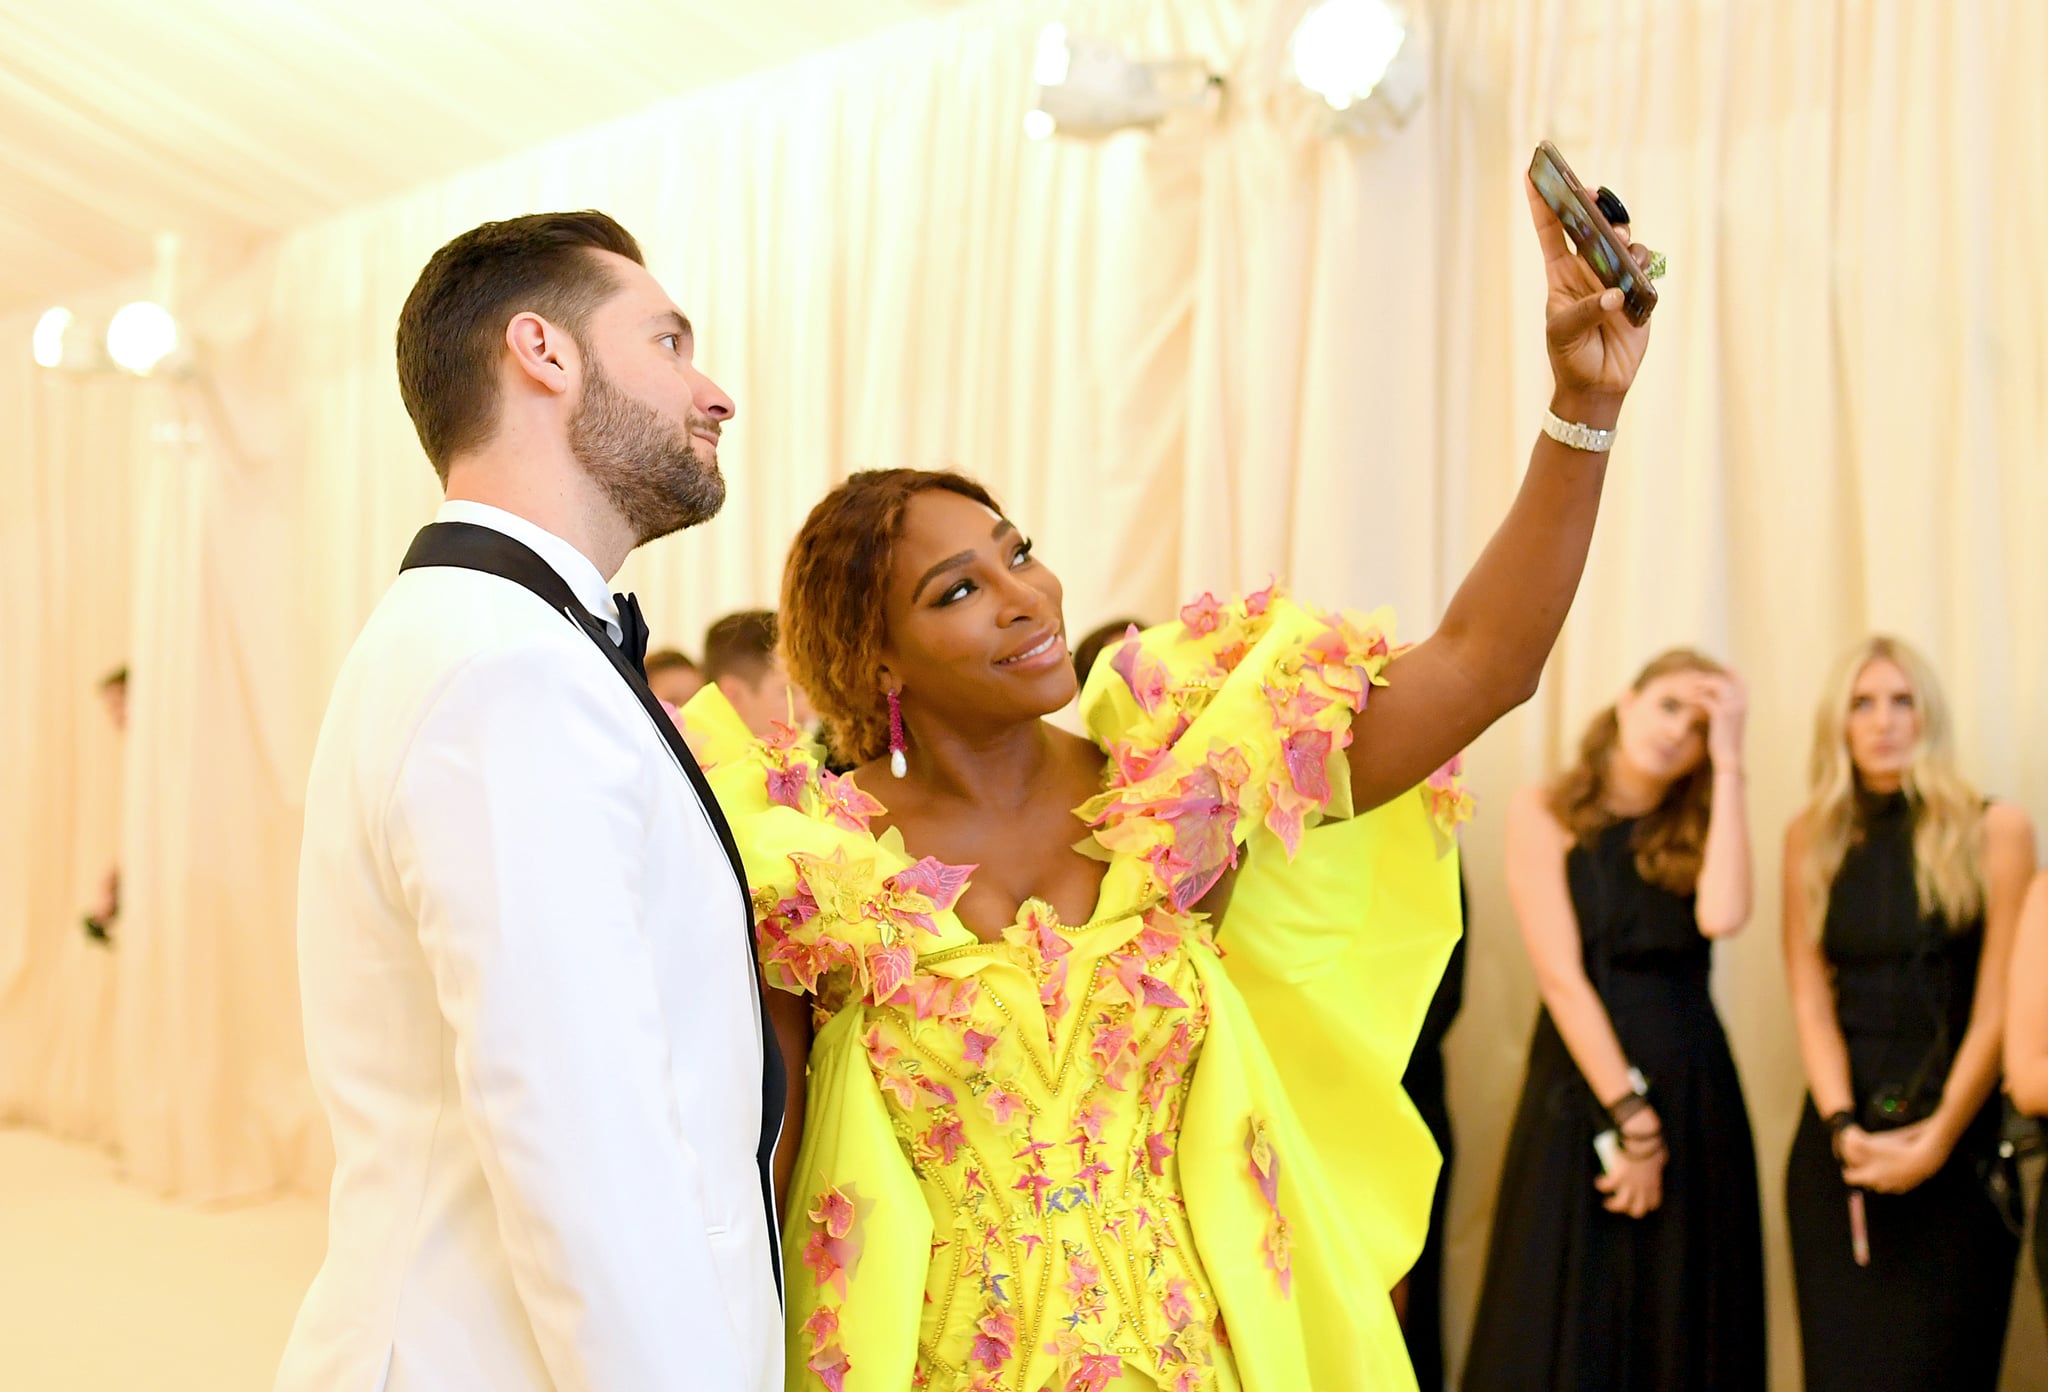 NEW YORK, NEW YORK - MAY 06: Serena Williams and Alexis Ohanian attend The 2019 Met Gala Celebrating Camp: Notes on Fashion at Metropolitan Museum of Art on May 06, 2019 in New York City. (Photo by Mike Coppola/MG19/Getty Images for The Met Museum/Vogue )